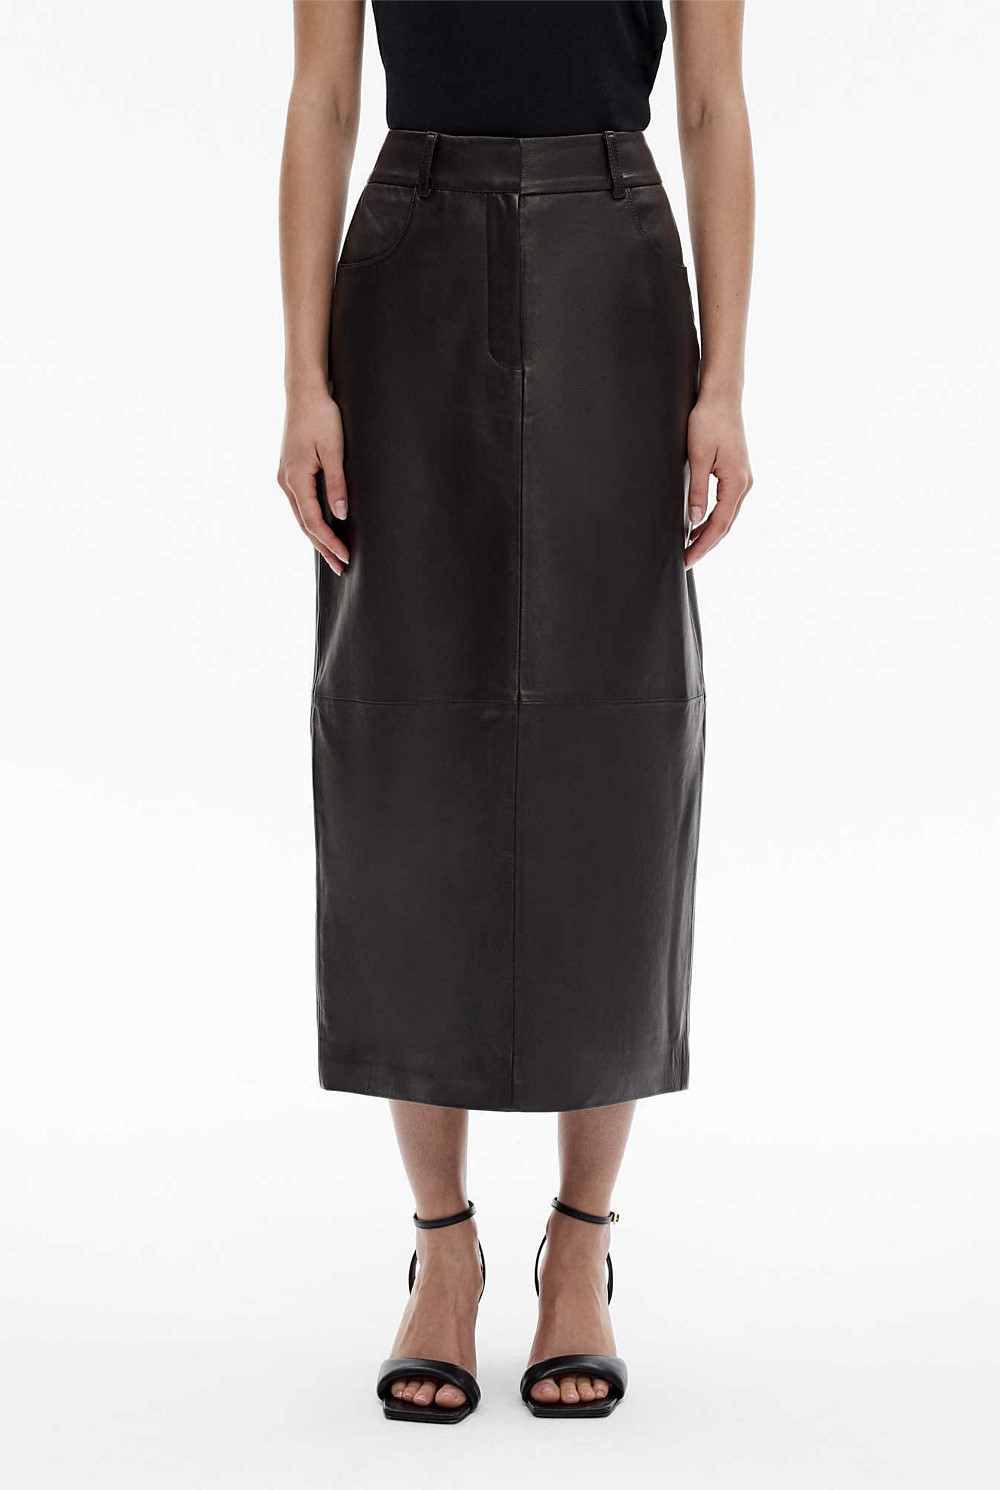 Skirts - Shop Women's Skirts Online - Witchery